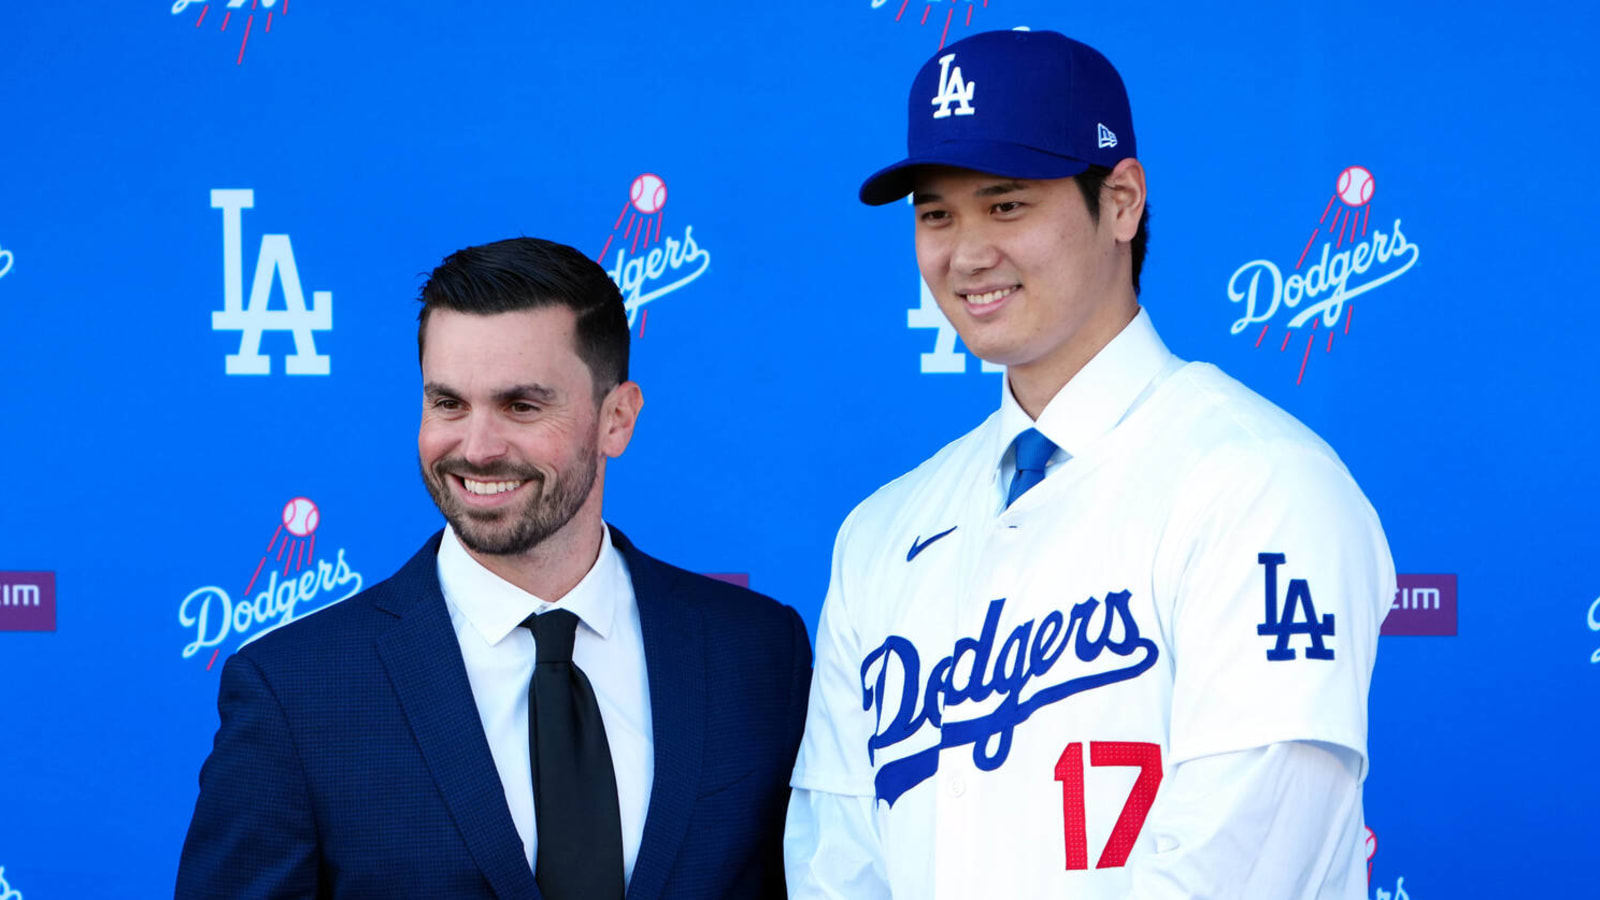 Shohei Ohtani already helped recruit one star player to Dodgers